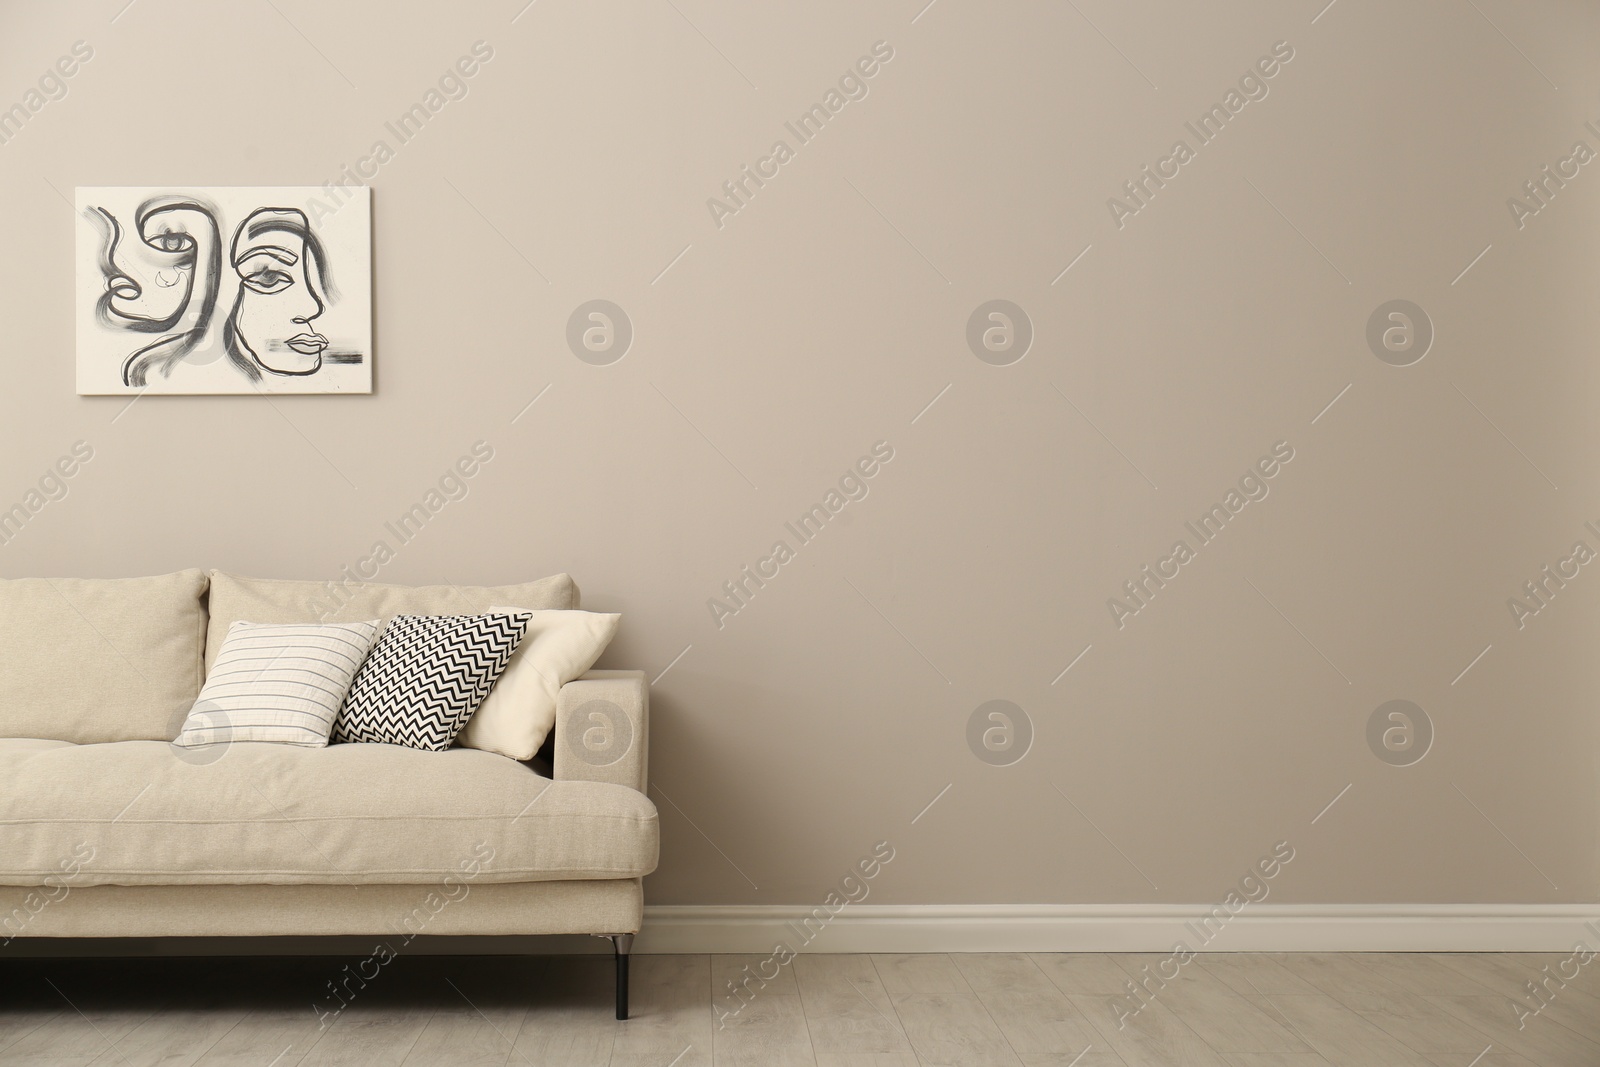 Photo of Modern comfortable sofa and picture near wall in room. Interior design